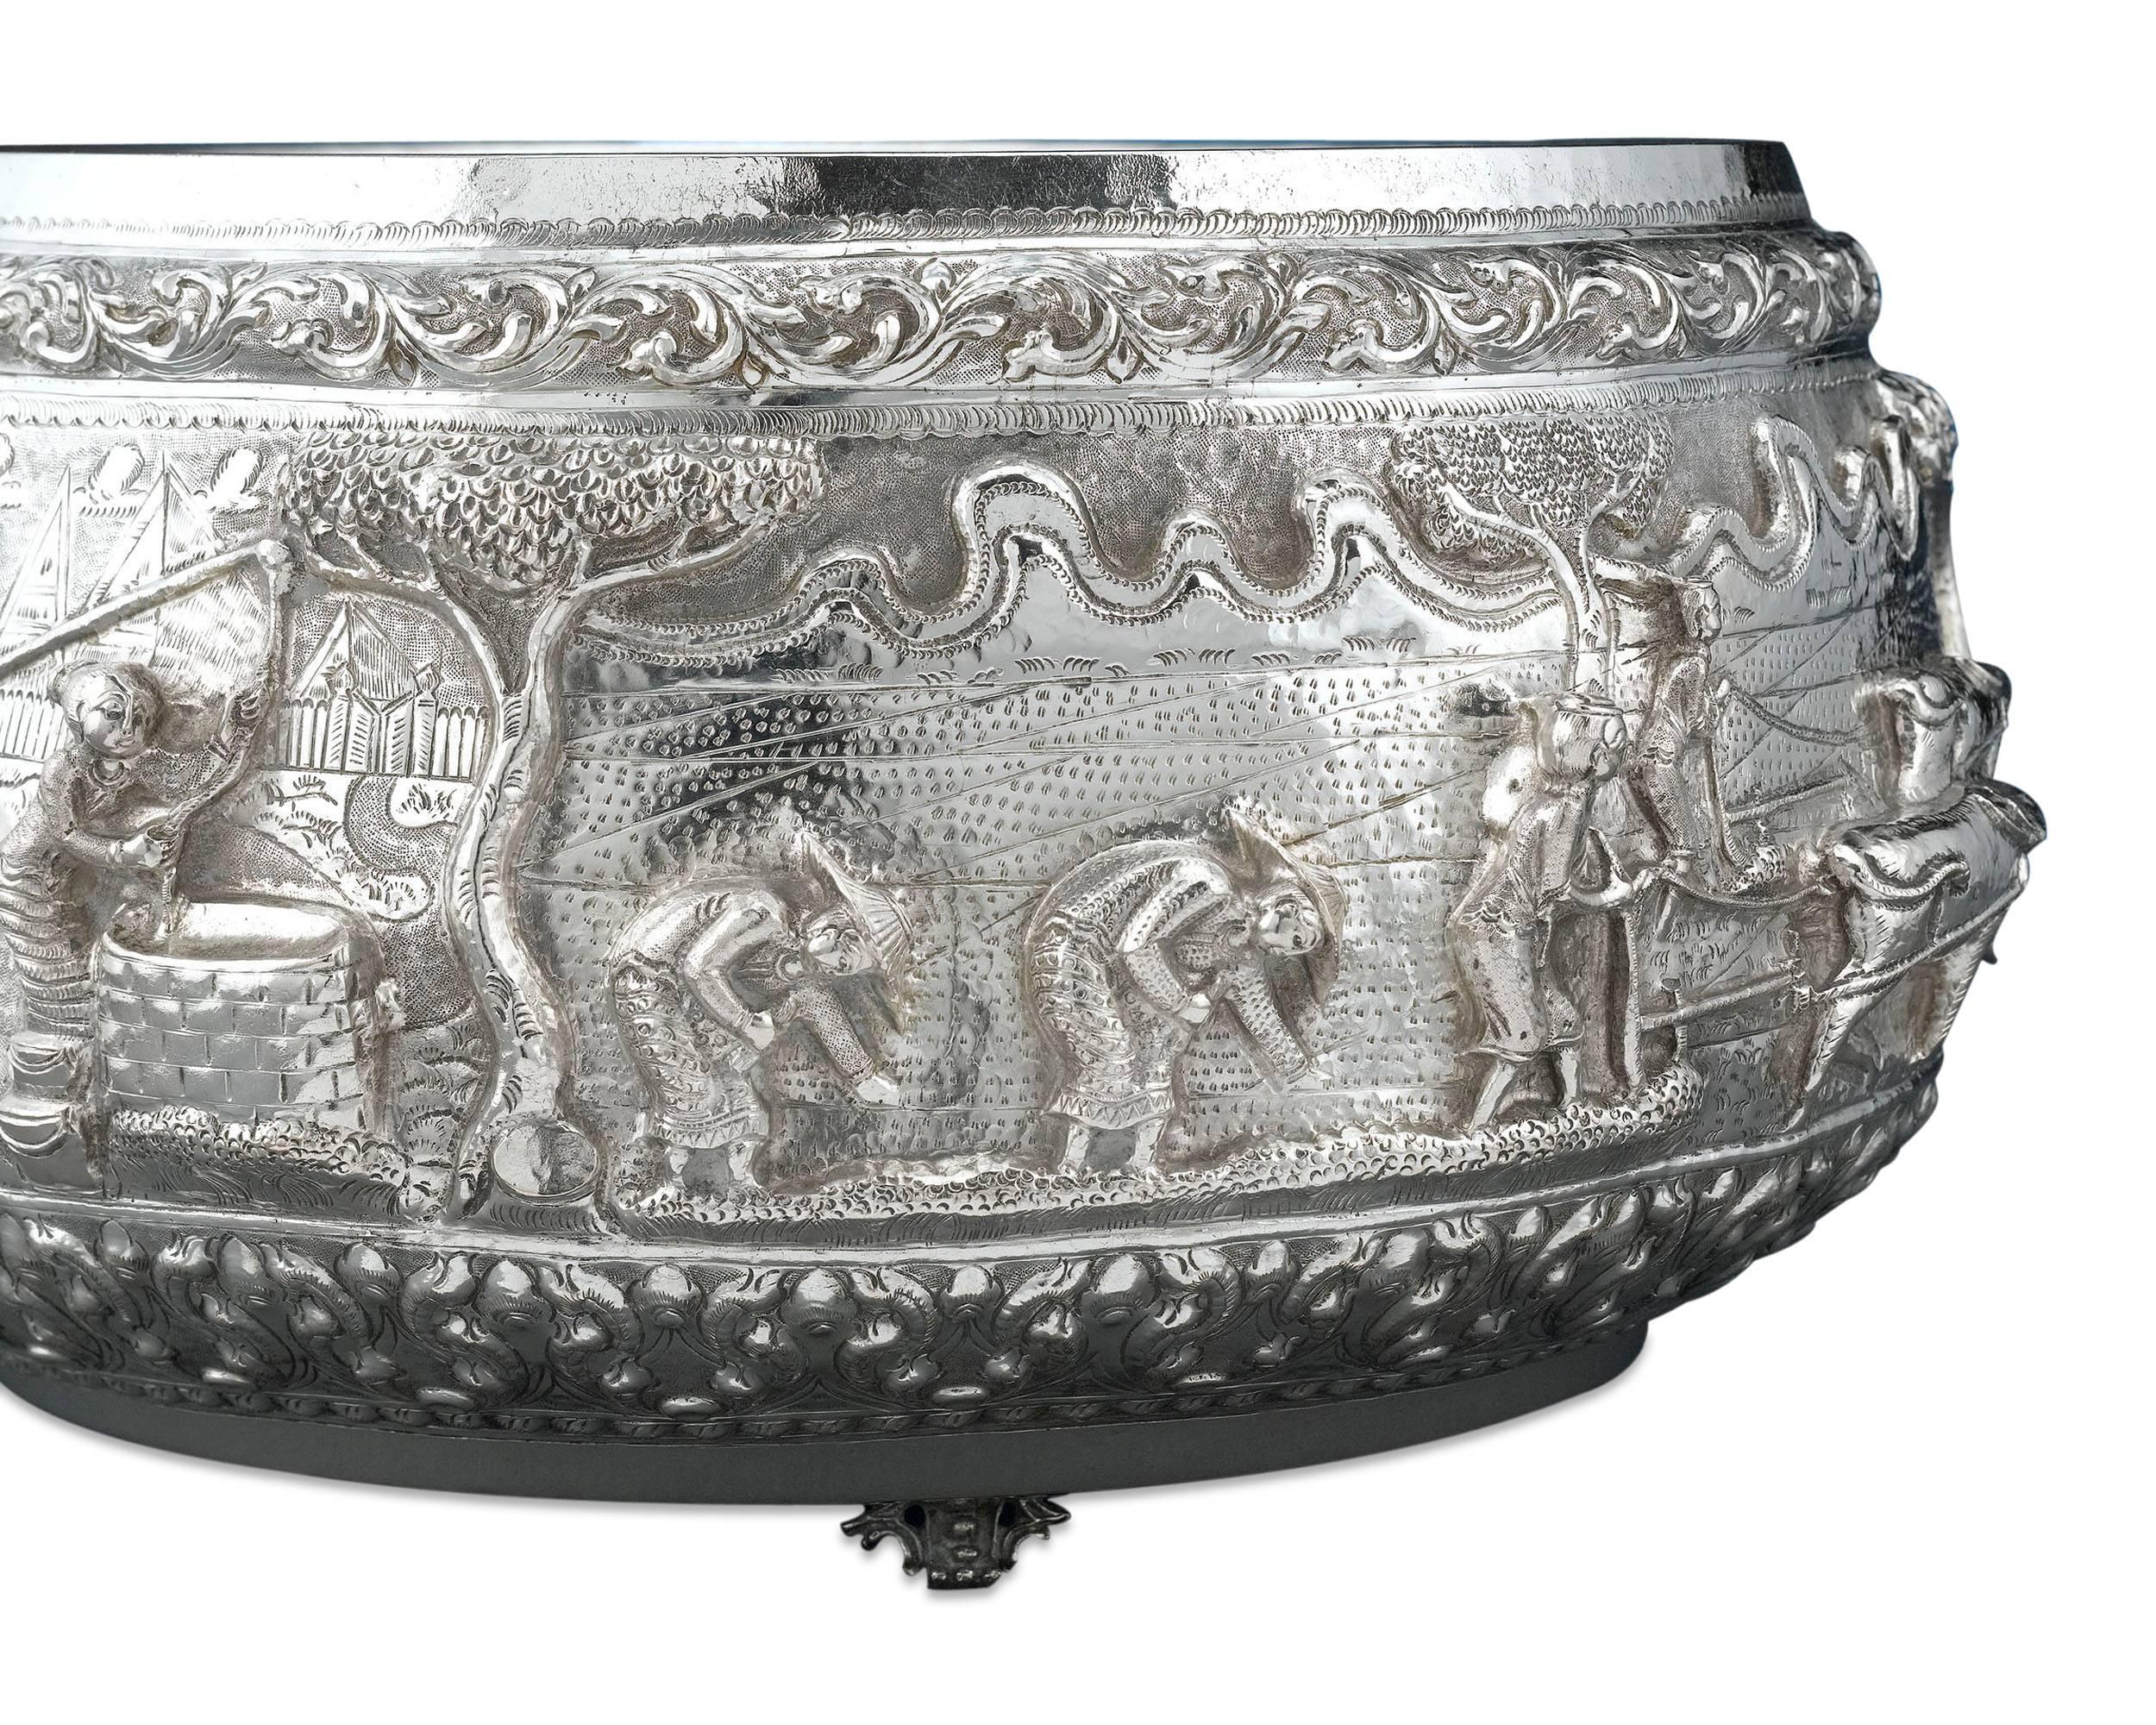 This unusually large Burmese silver bowl is most certainly the work of a master artist. A tour-de-force of silver hailing from Burma, or Myanmar, this bowl exhibits some of the most magnificent high-relief repoussé decoration. A continuous tableau